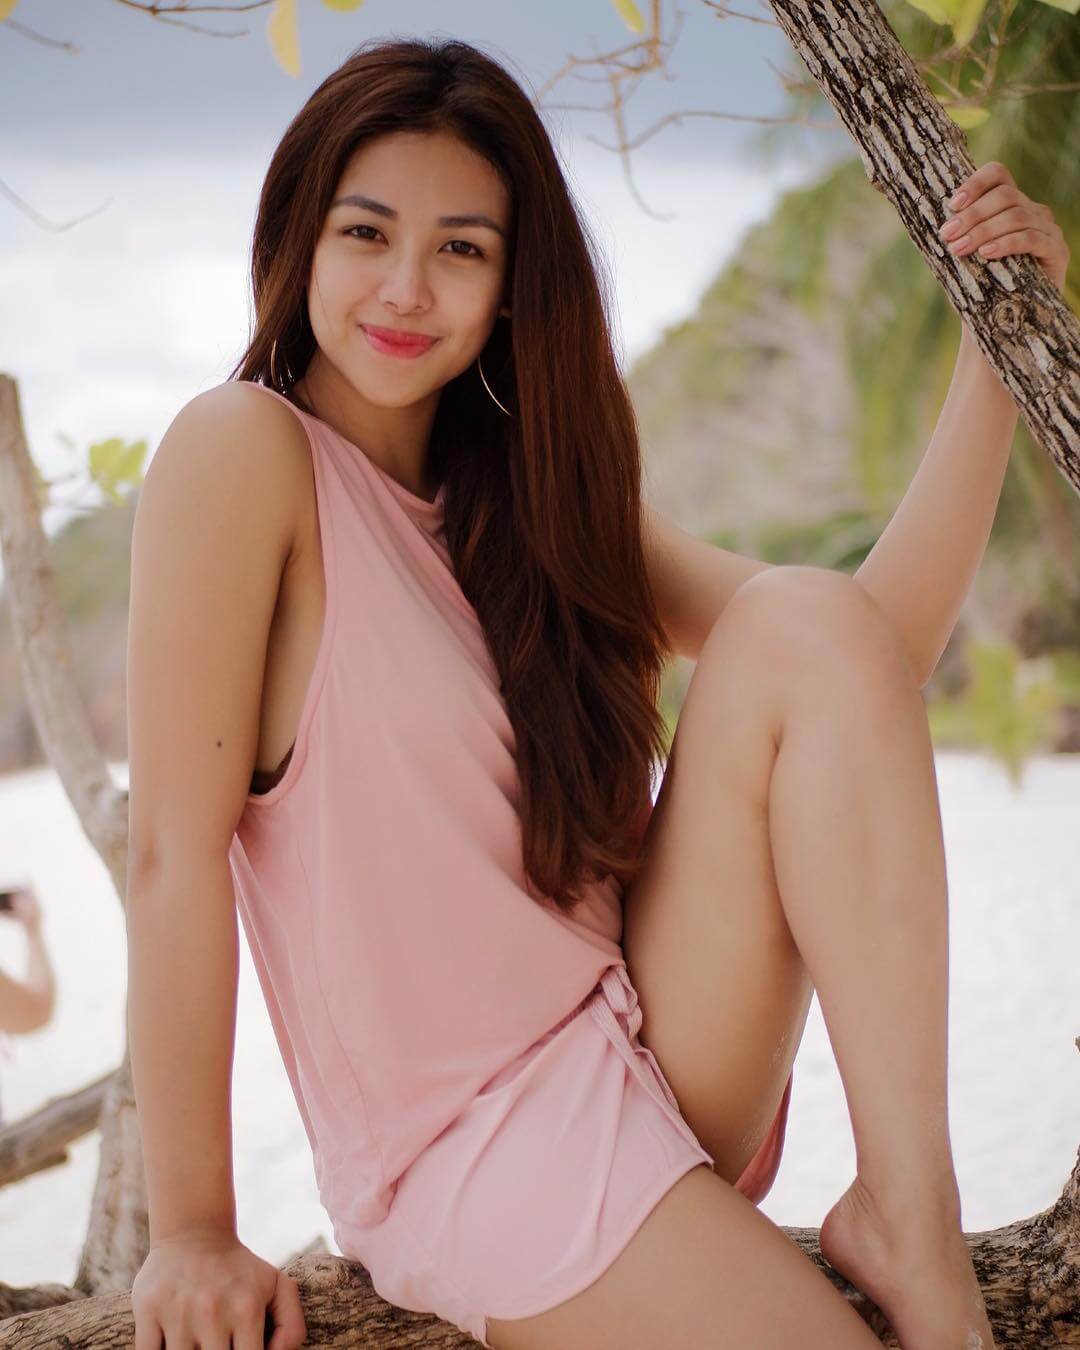 49 Hot Pictures Of Sanya Lopez Will Make You Drool For Her.